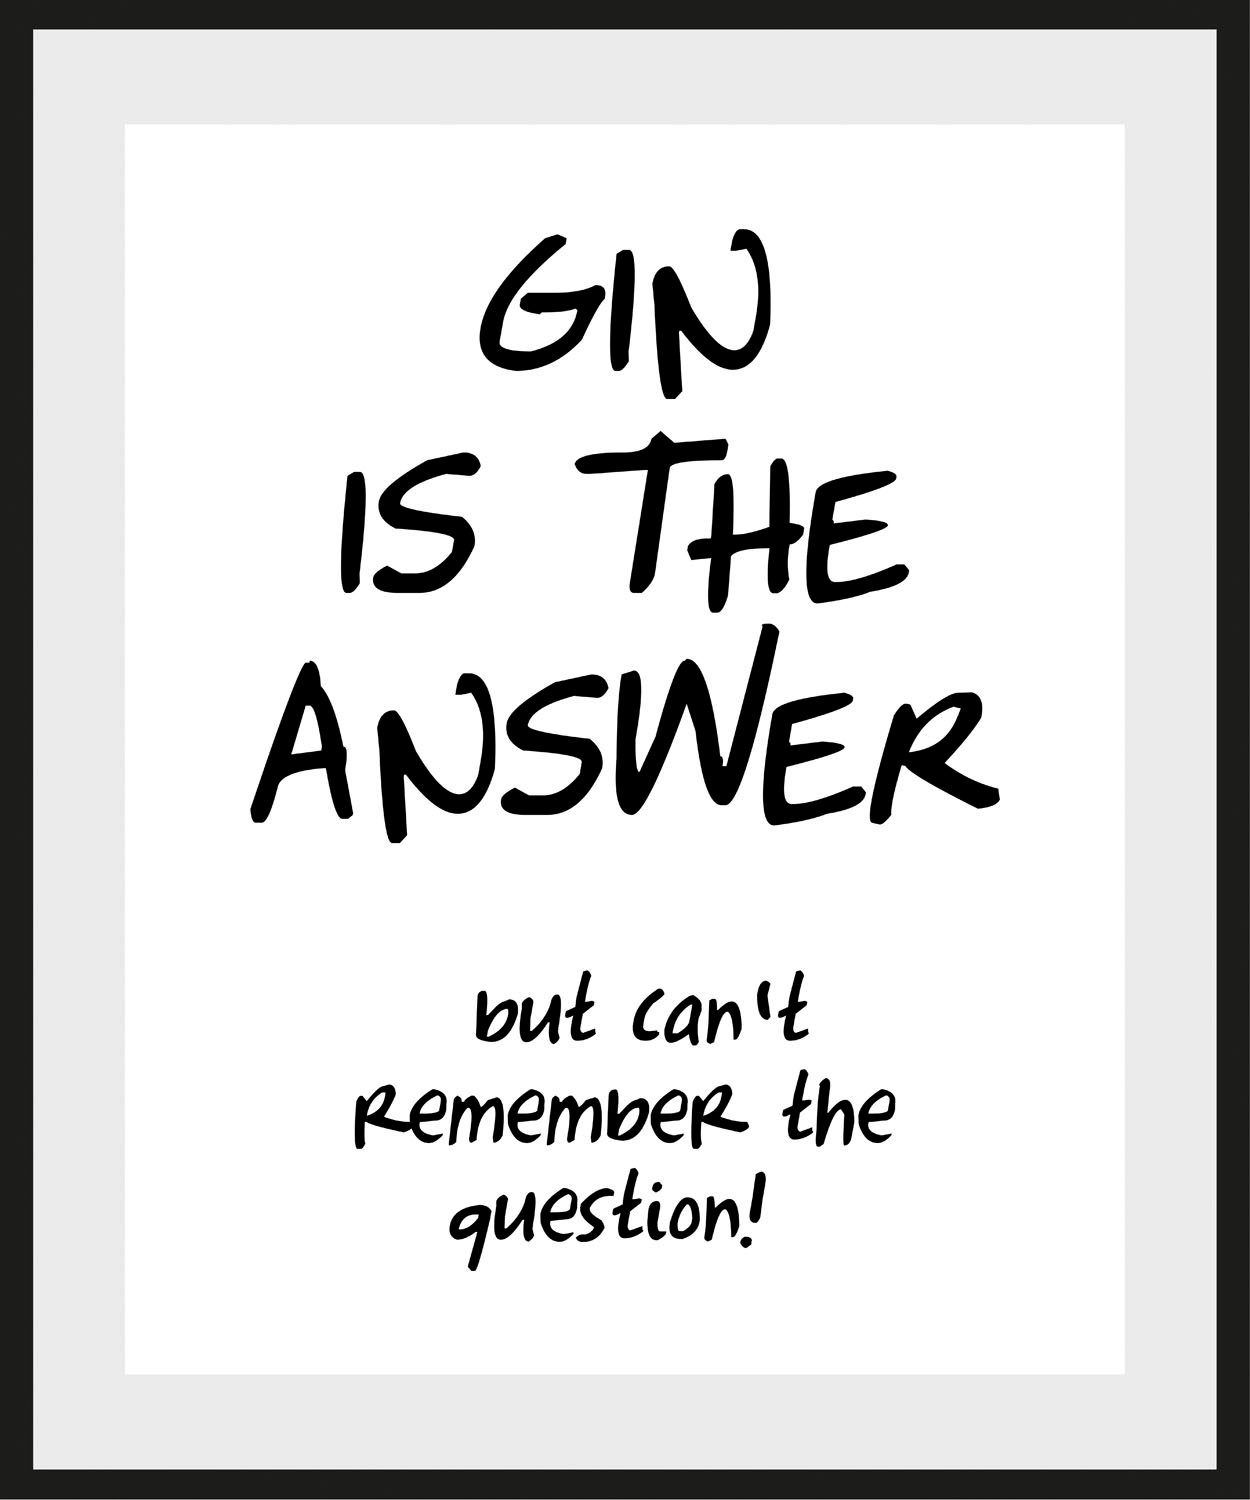 Bild IS queence THE (1 ANSWER, St) GIN